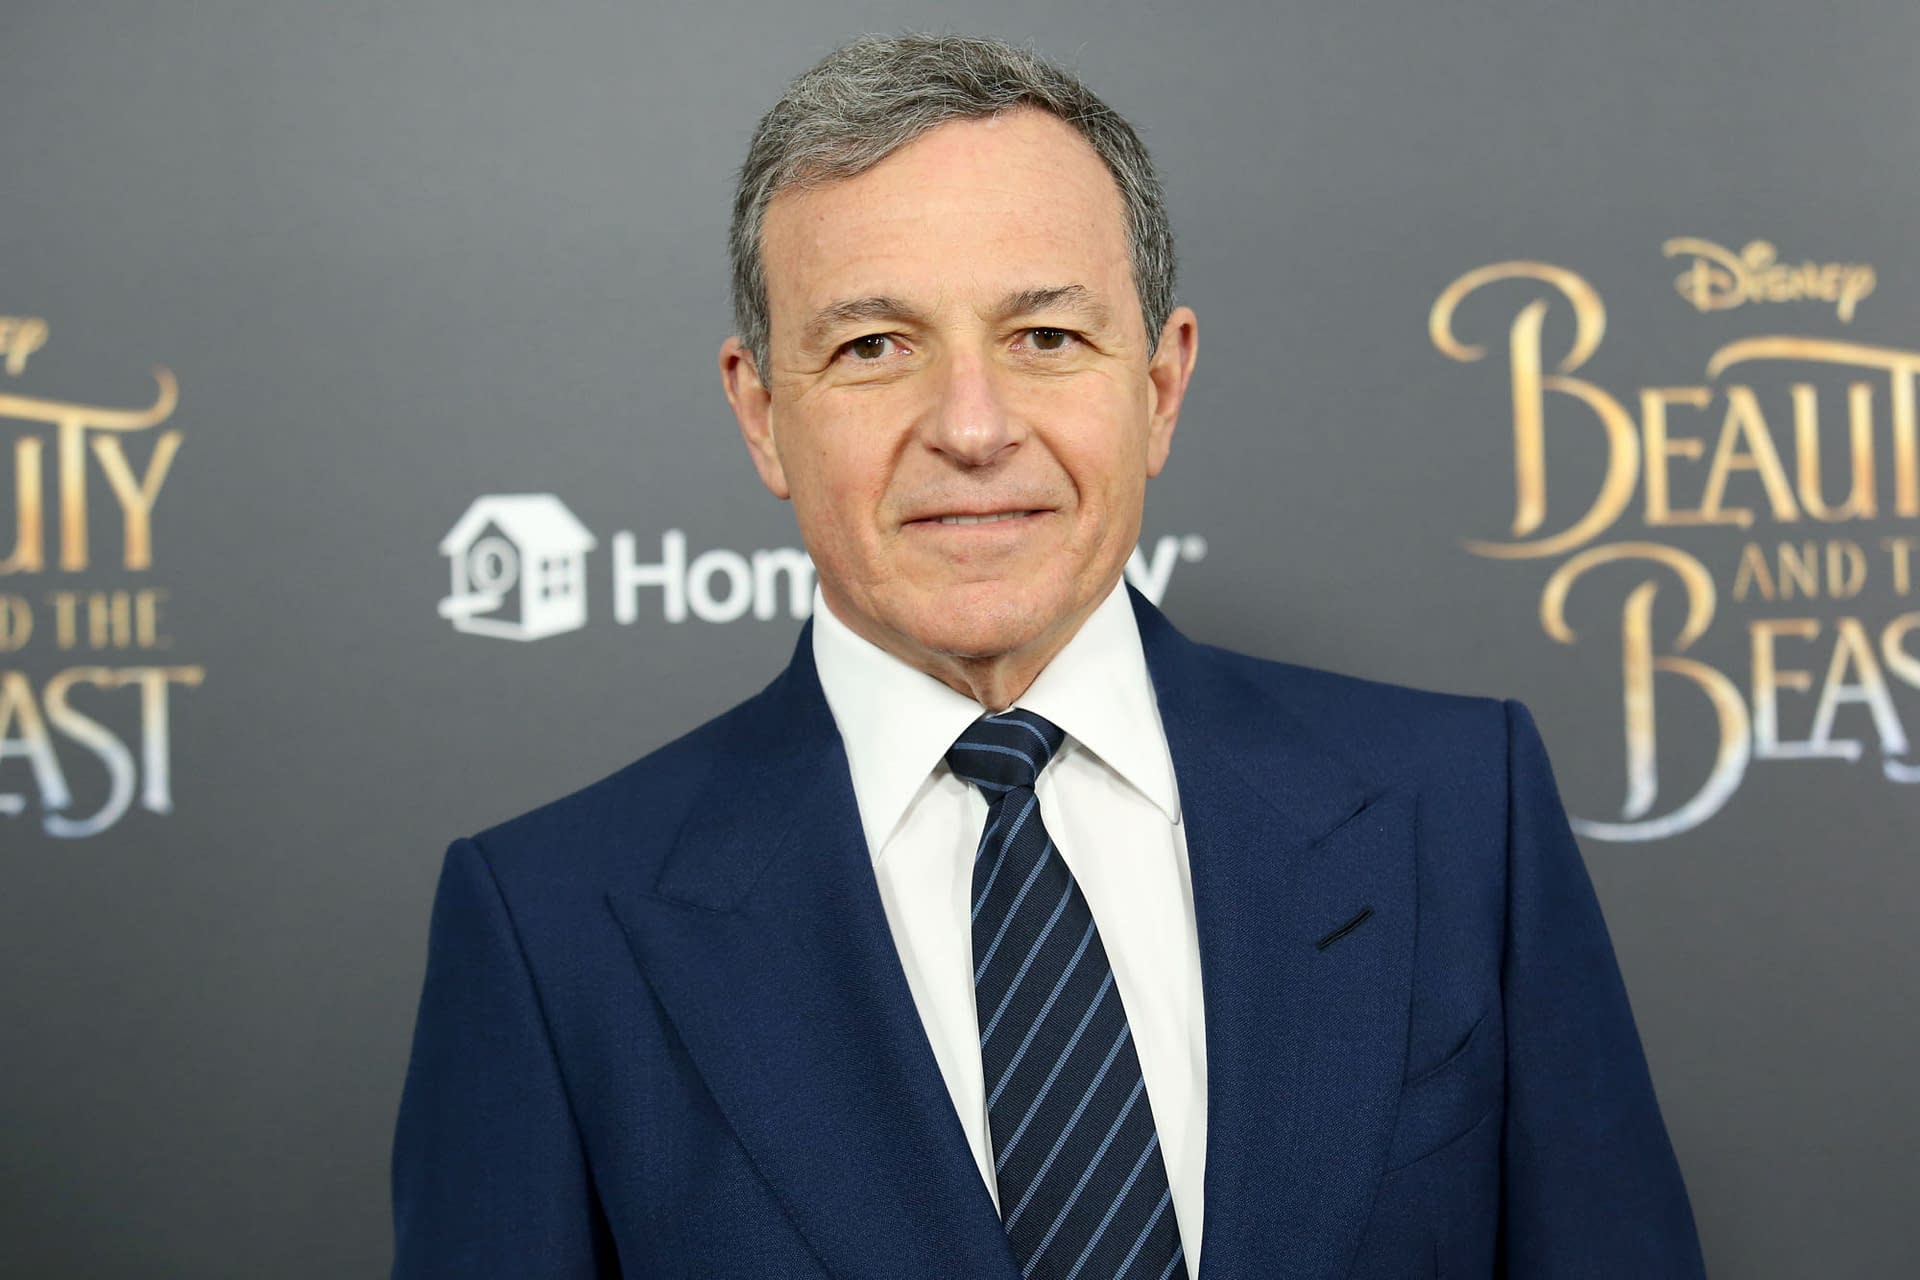 Bob Iger Says That "Less Is More" When It Comes to Star Wars